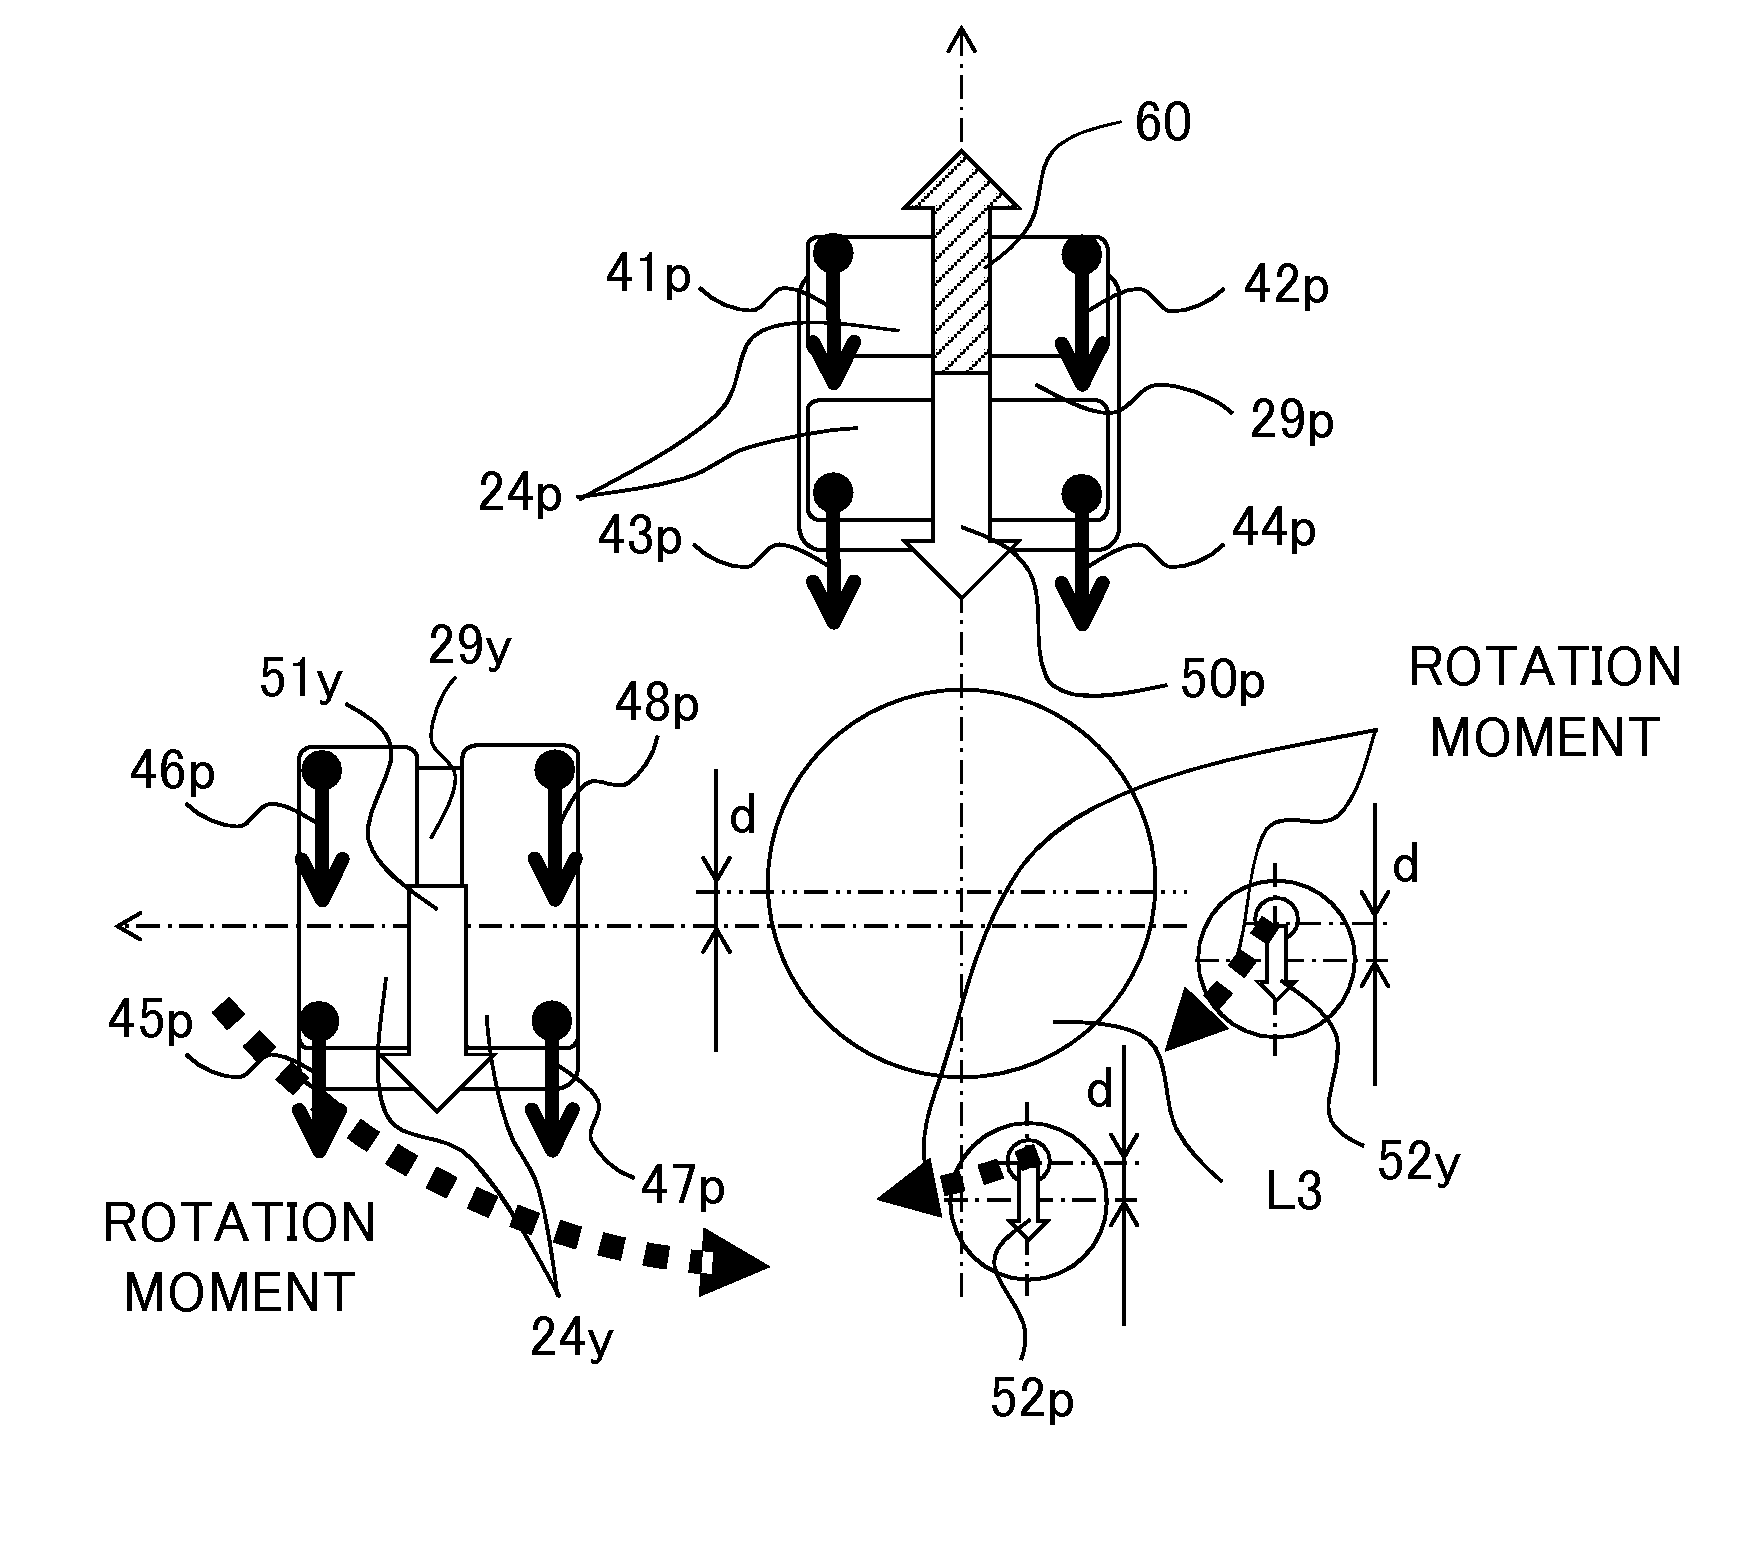 Image stabilizing apparatus that corrects image blur caused by hand shake, lens barrel, and optical apparatus